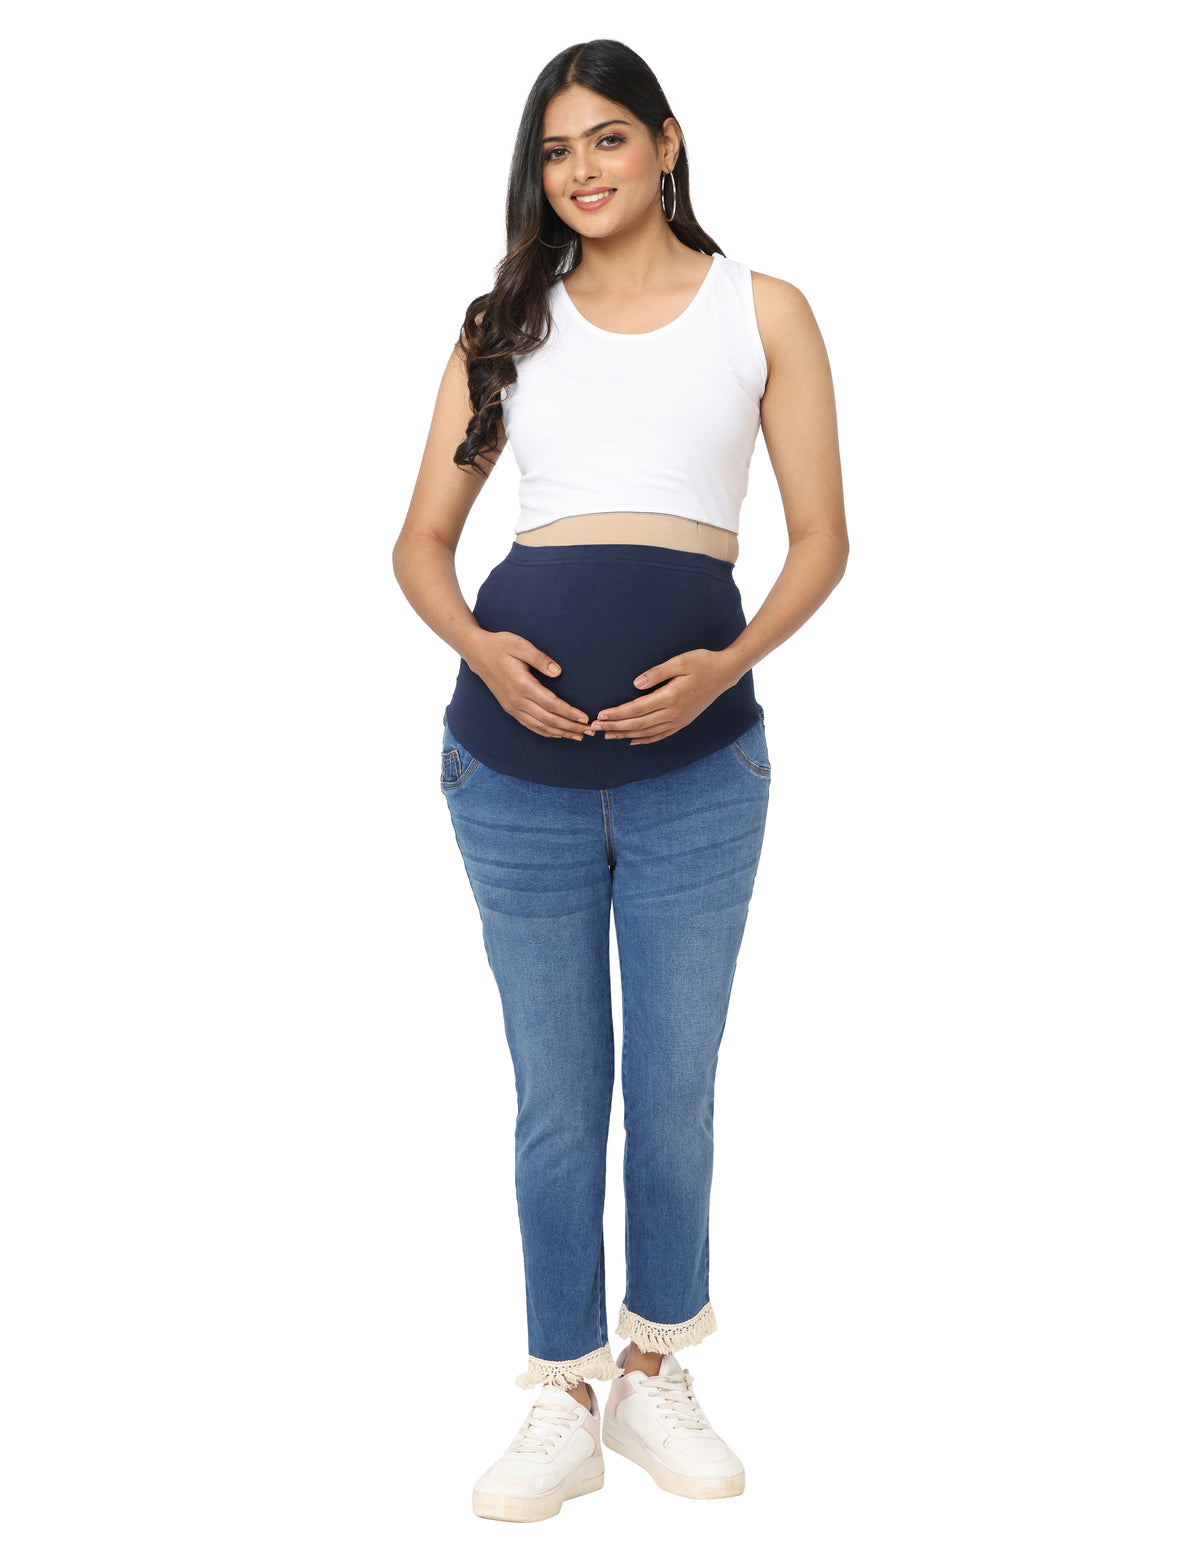 Ankle length Flare Maternity Jeans with Tassels - Blue